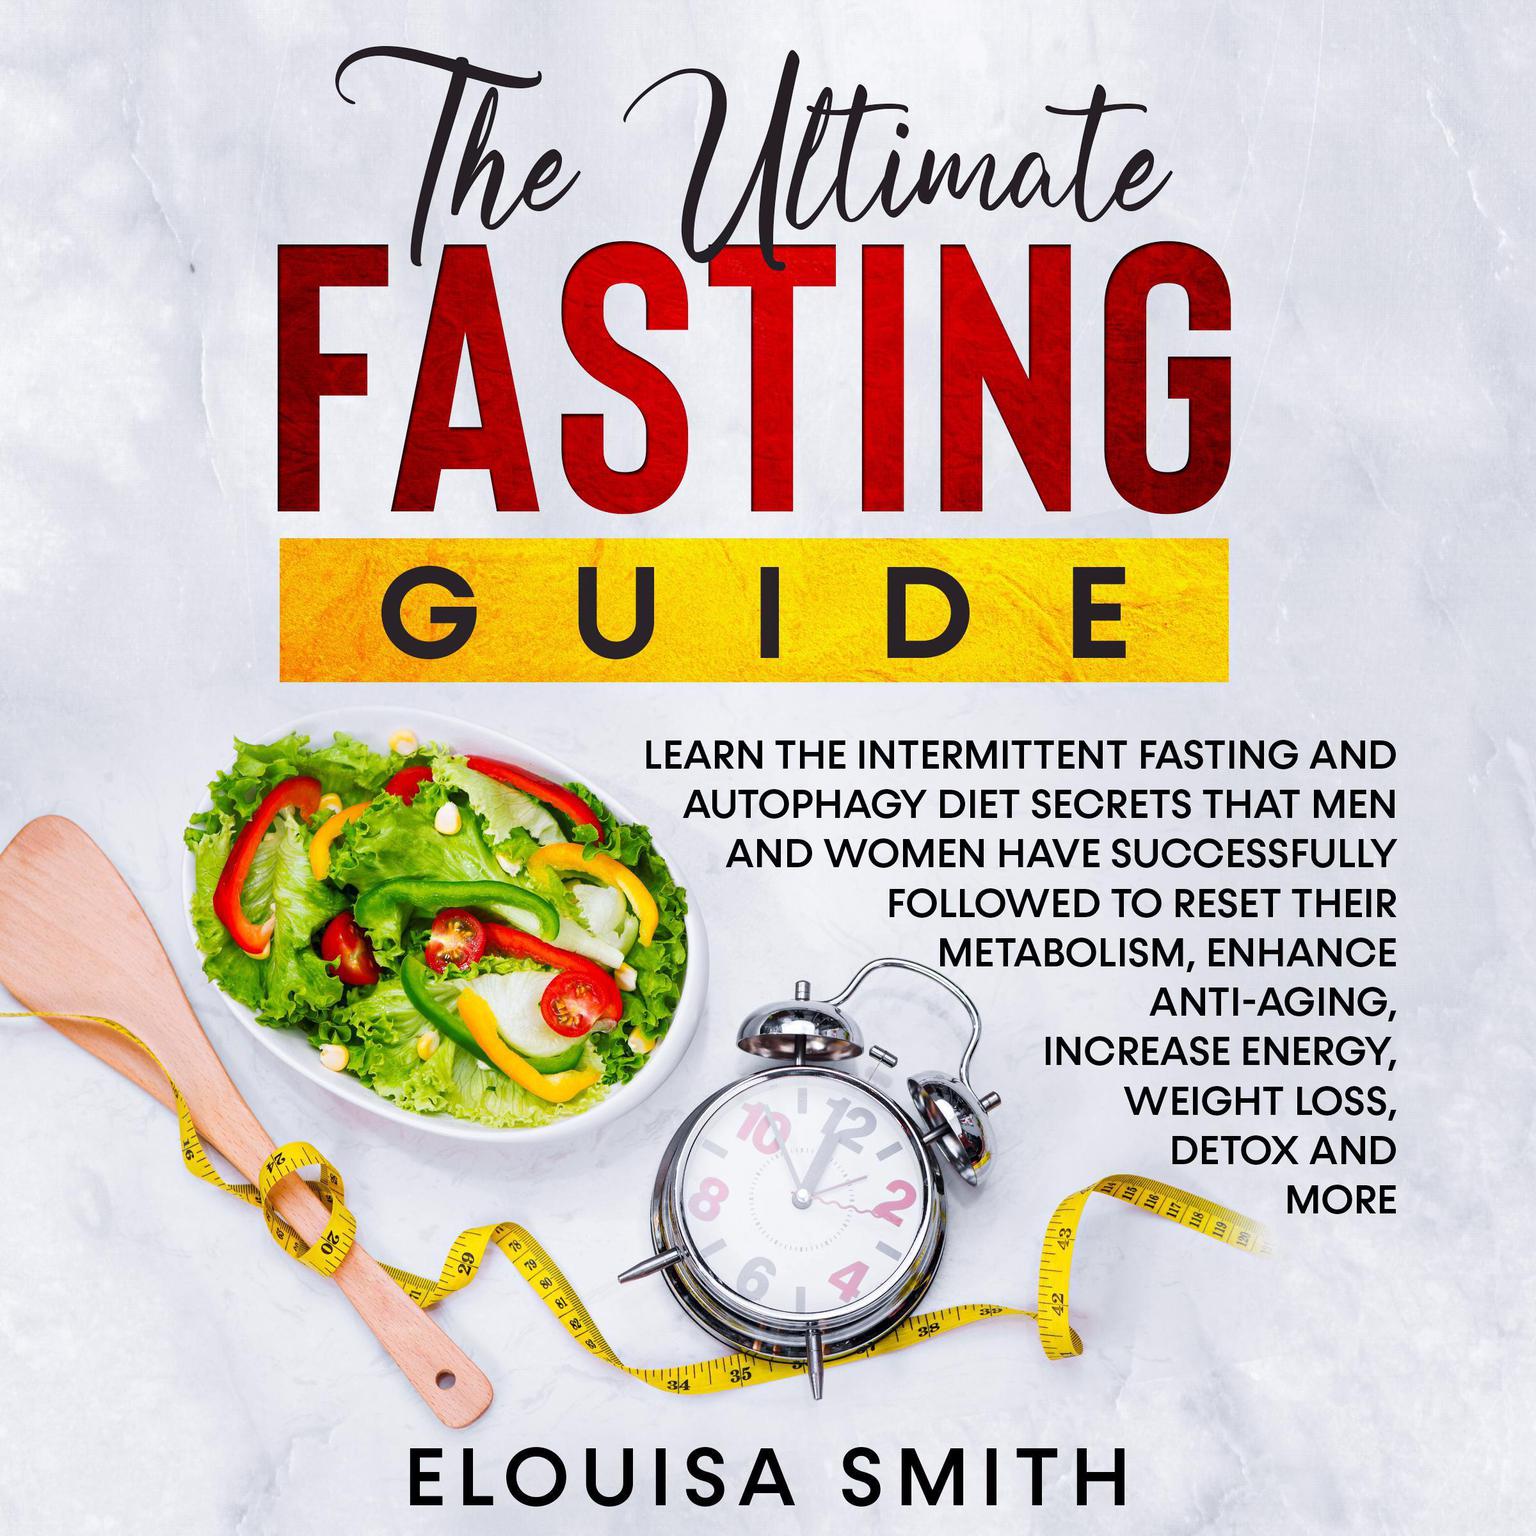 The Ultimate Fasting Guide: Learn the intermittent fasting and autophagy diet secrets that men and women have successfully followed to reset their metabolism, enhance anti-aging, increase energy, weight loss, detox and more Audiobook, by Elouisa Smith